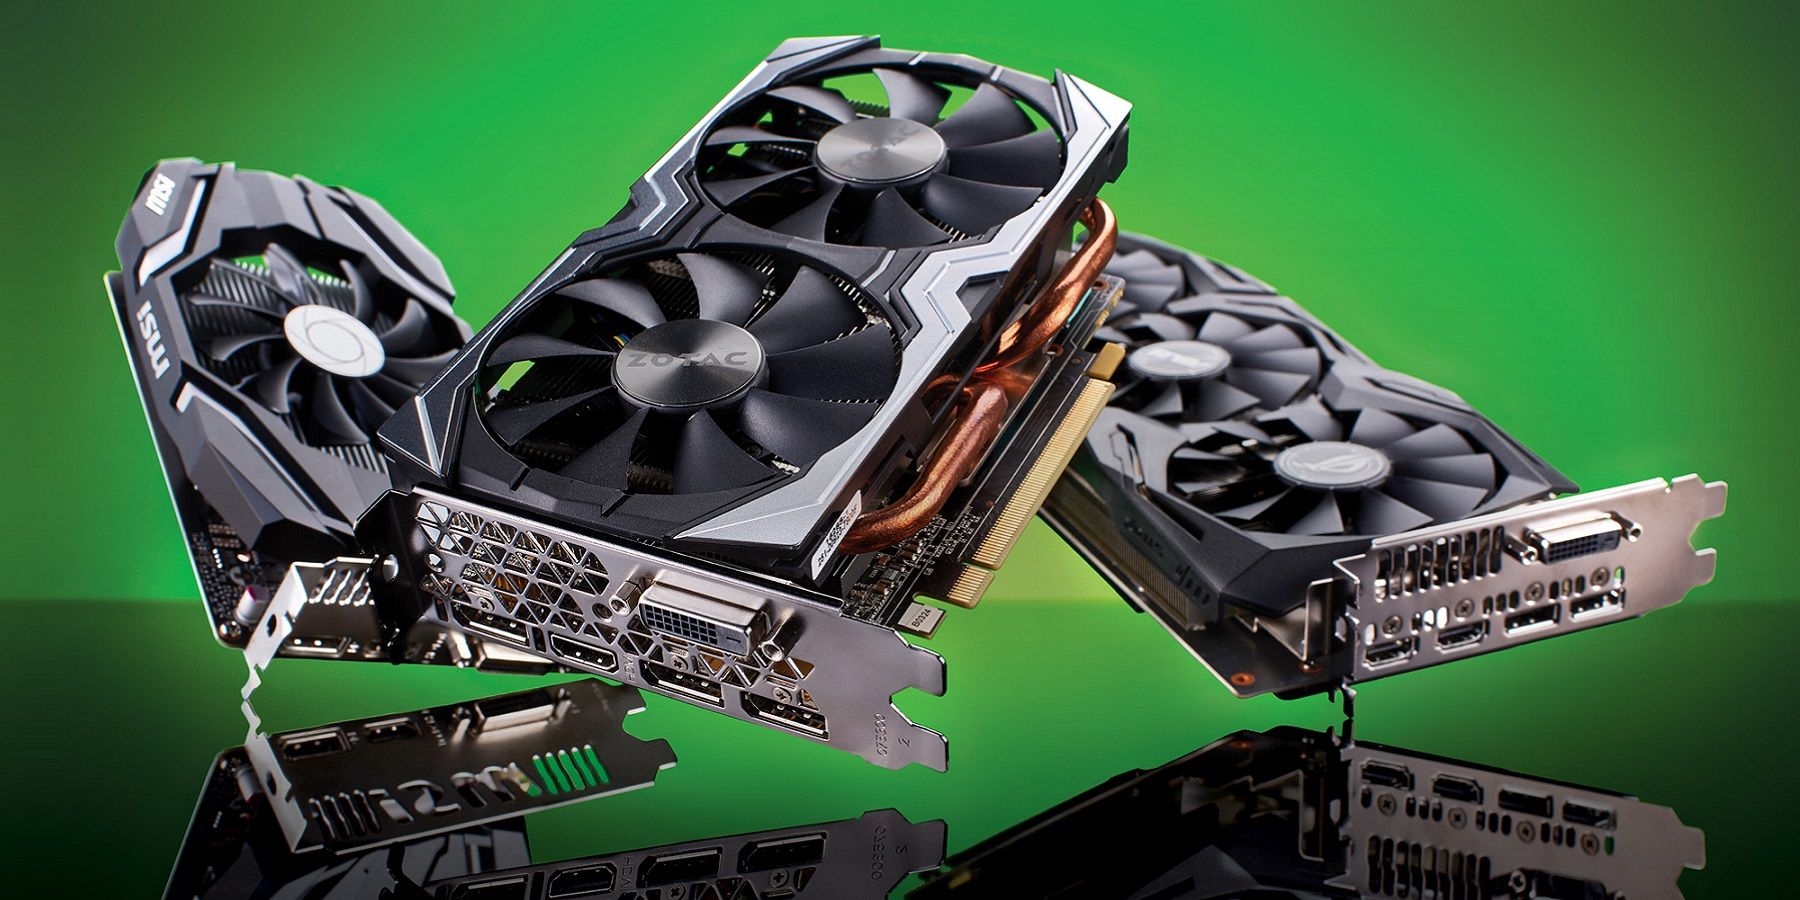 Some AMD and Nvidia graphics cards on a green background.